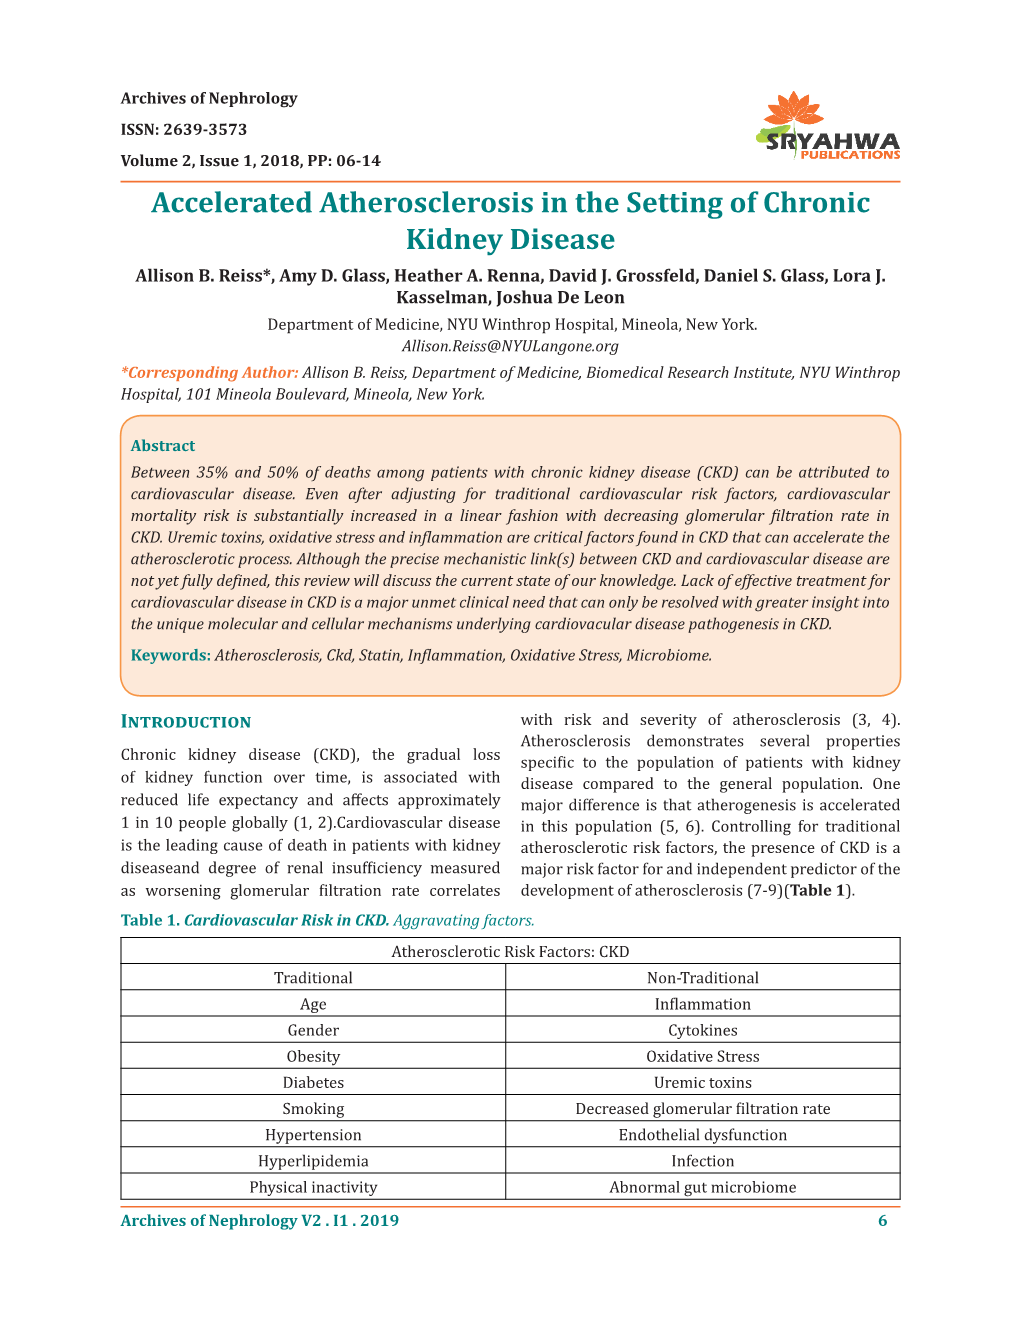 Accelerated Atherosclerosis in the Setting of Chronic Kidney Disease Allison B